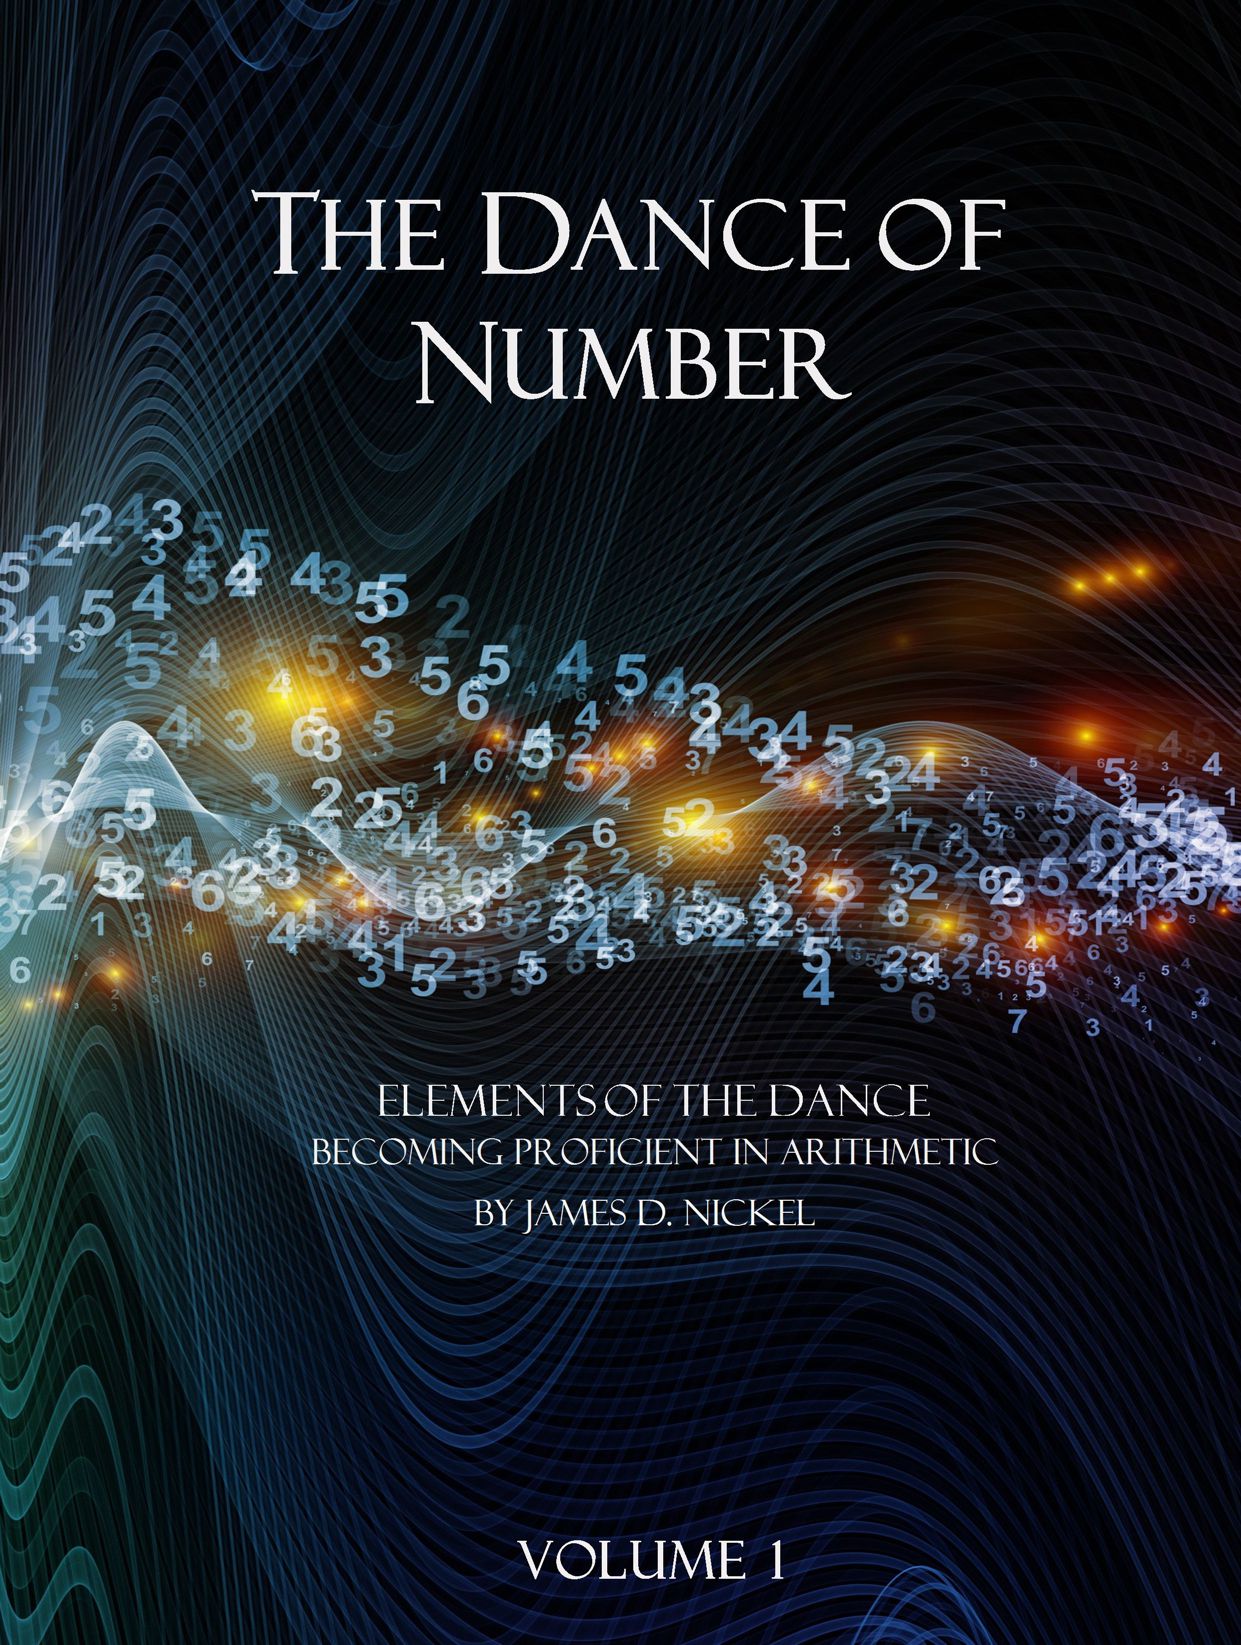 The Dance of Number